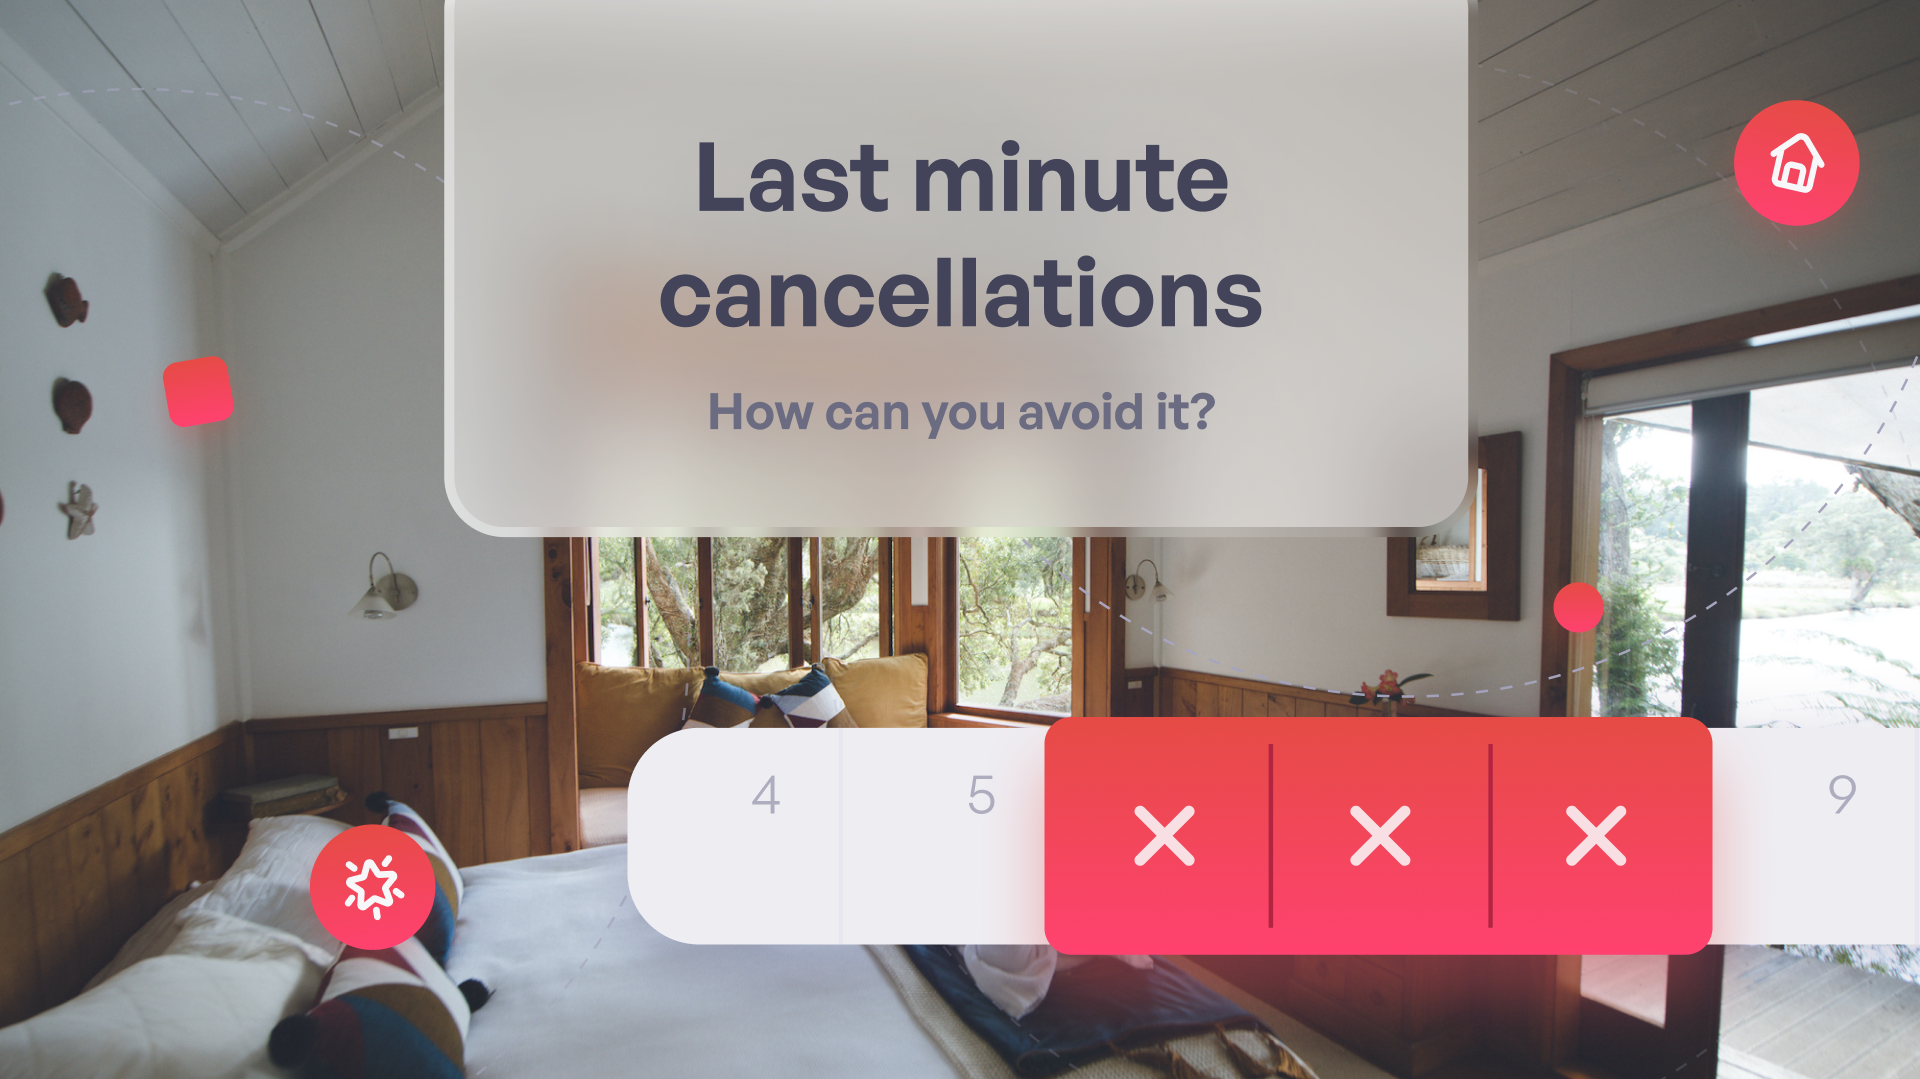 Cancel at the last moment - how to avoid it?